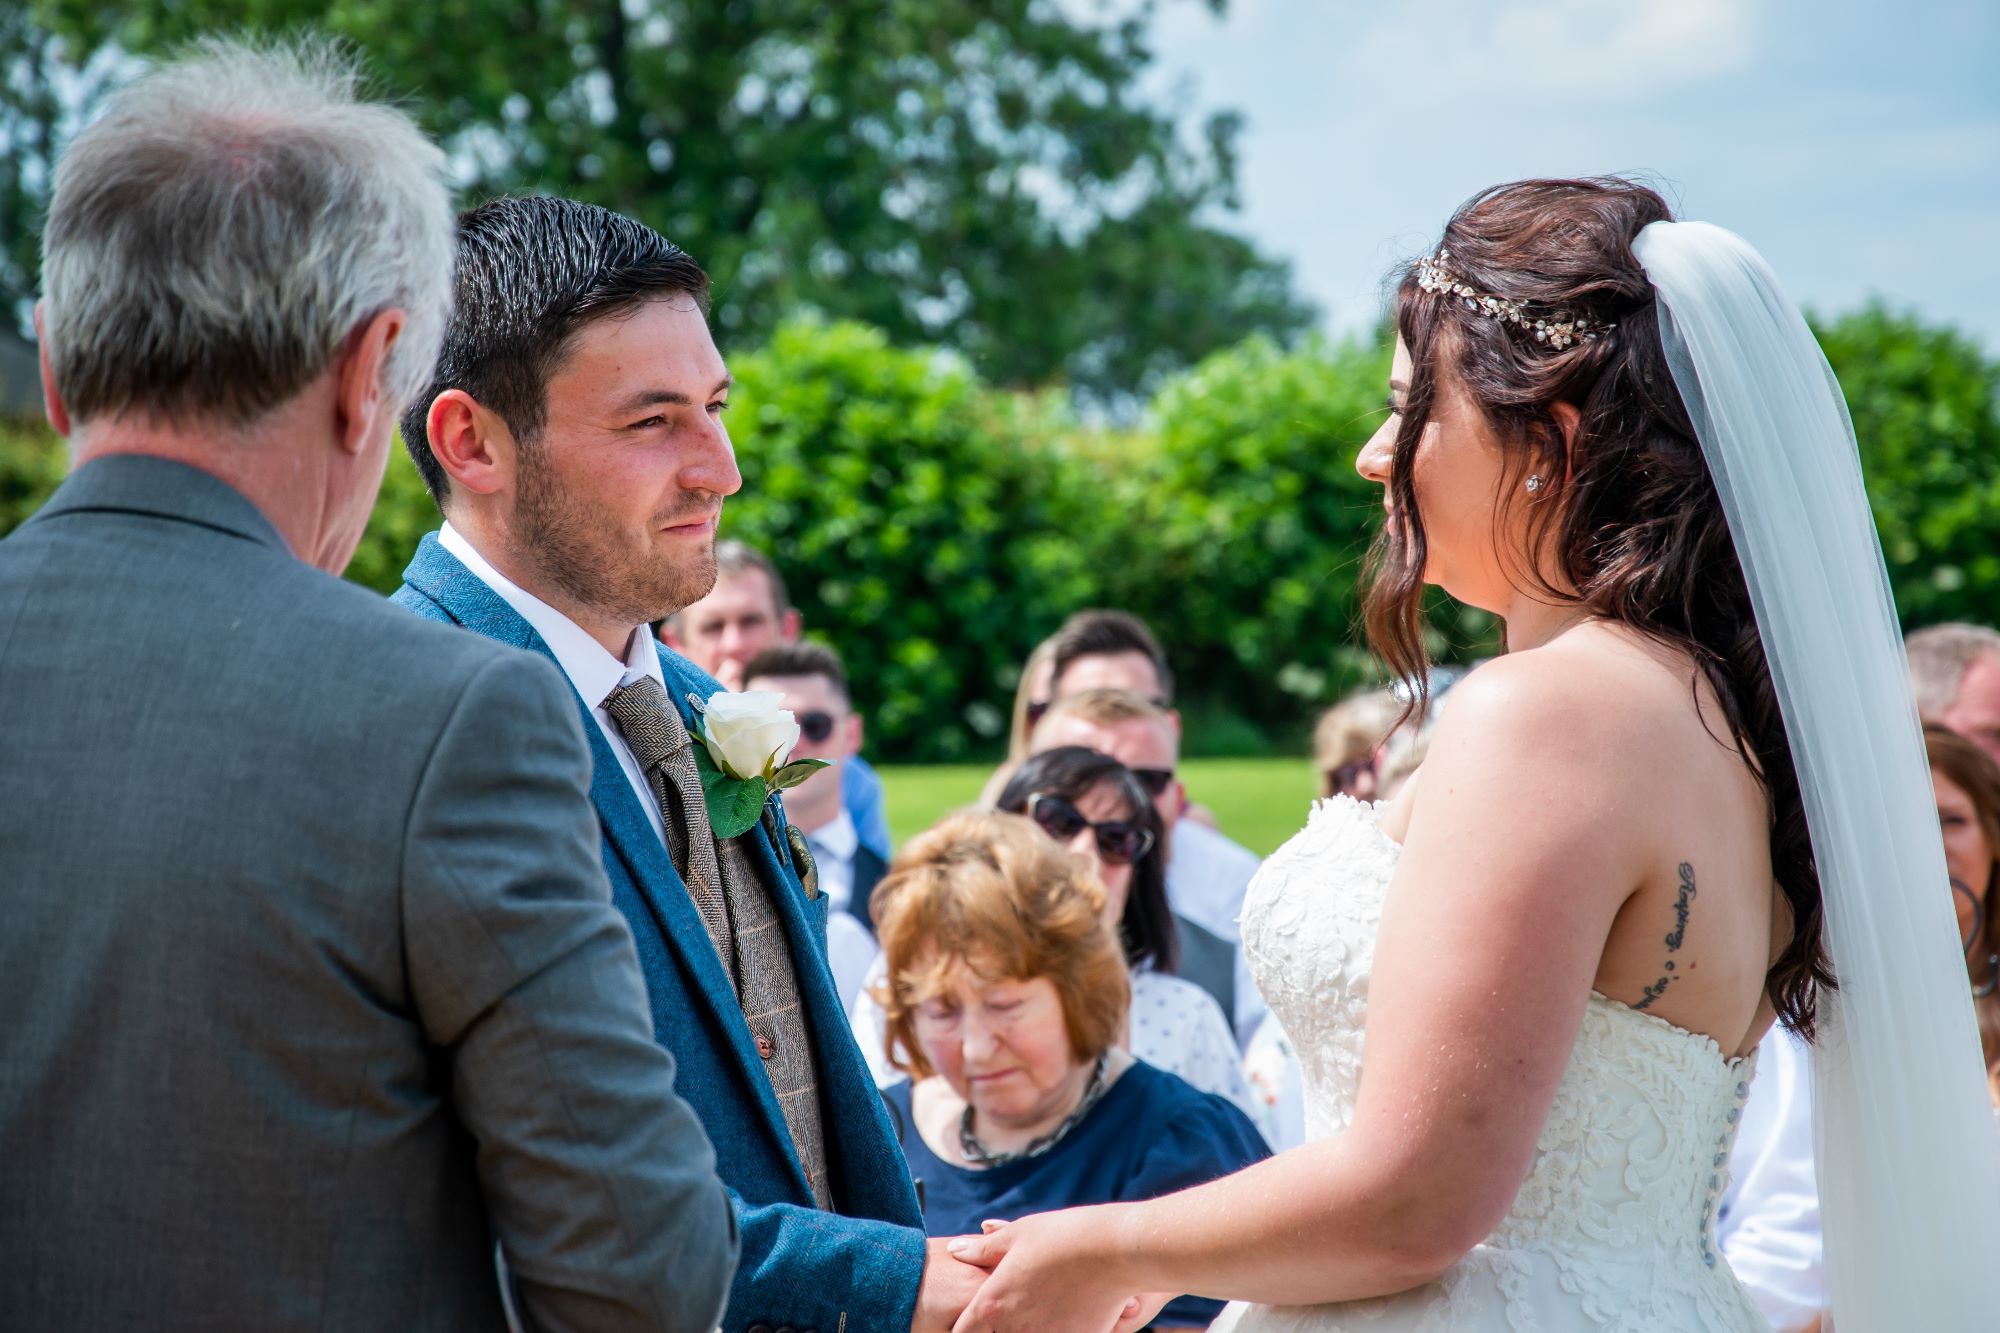 the bride and groom say their vows in front of their family and friends at an outdoor wedding in pickering, north yorkshire